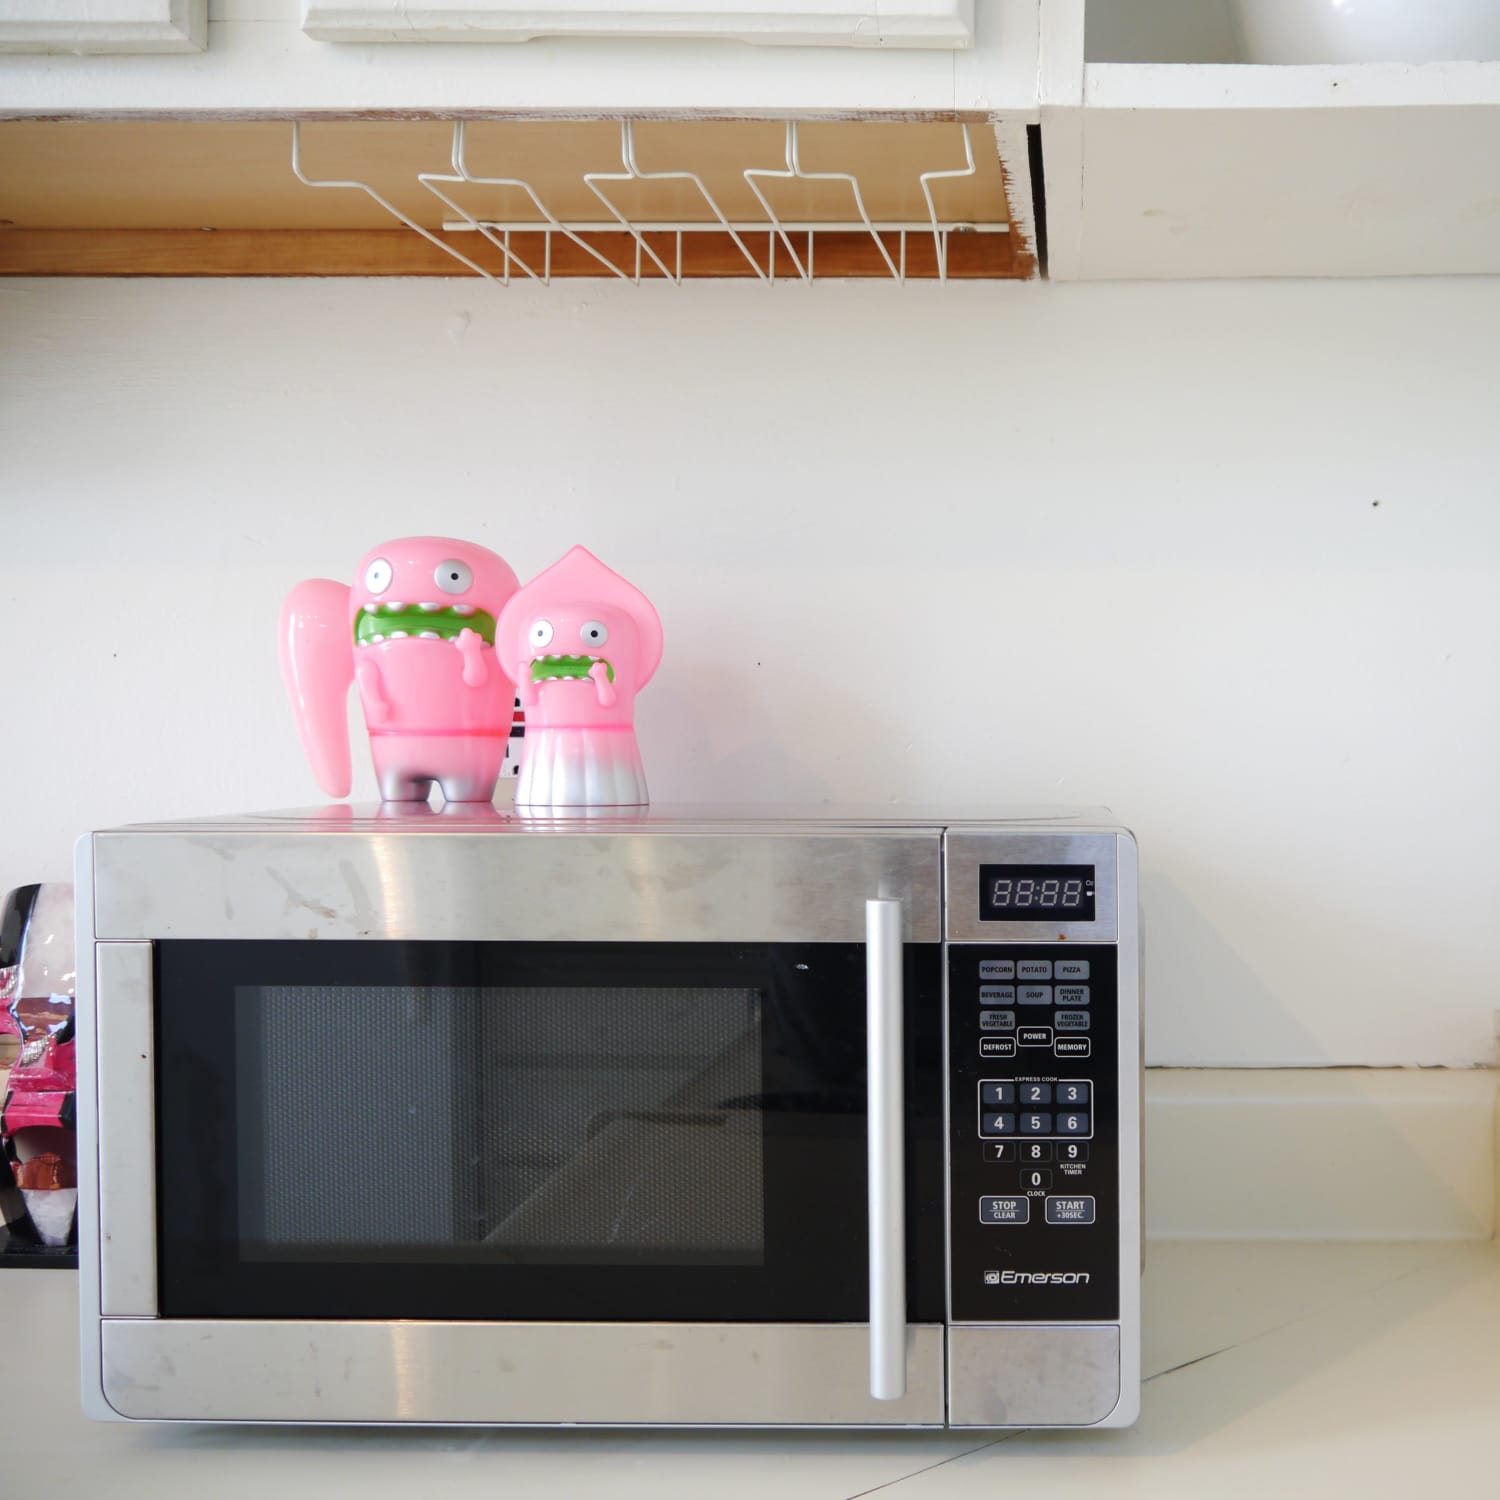 How to buy a microwave - CNET